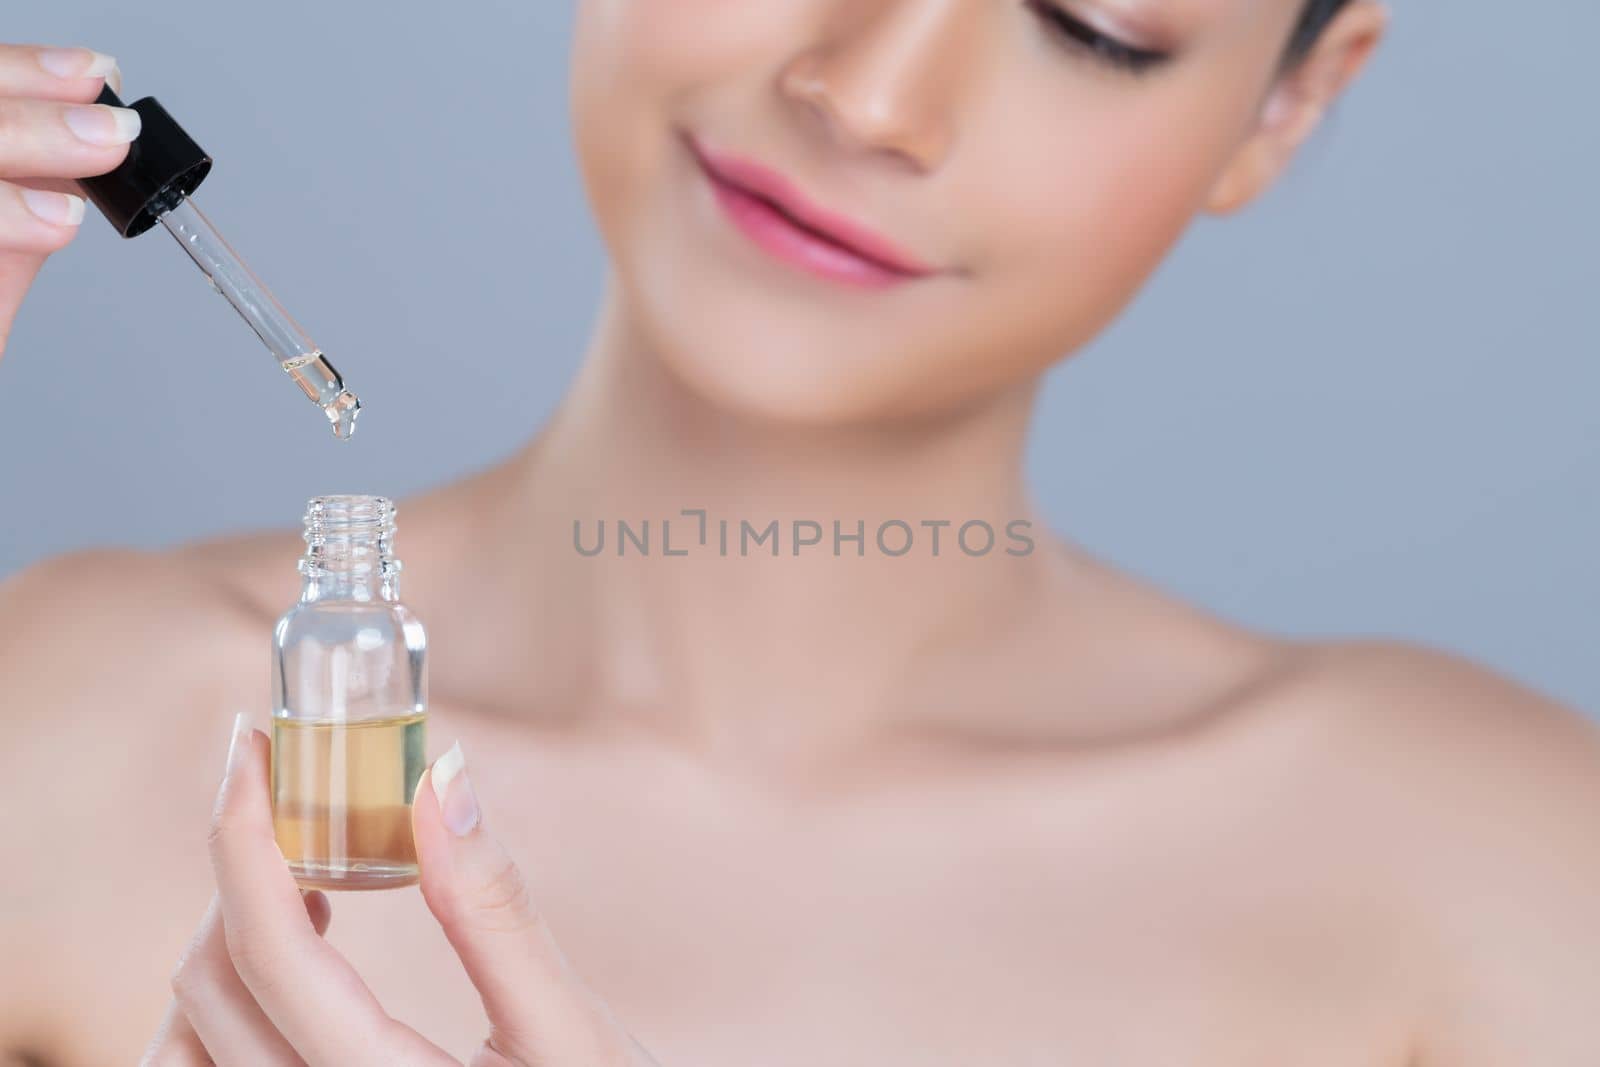 Focus cannabis extracted oil bottle holding by blurred glamorous woman. by biancoblue